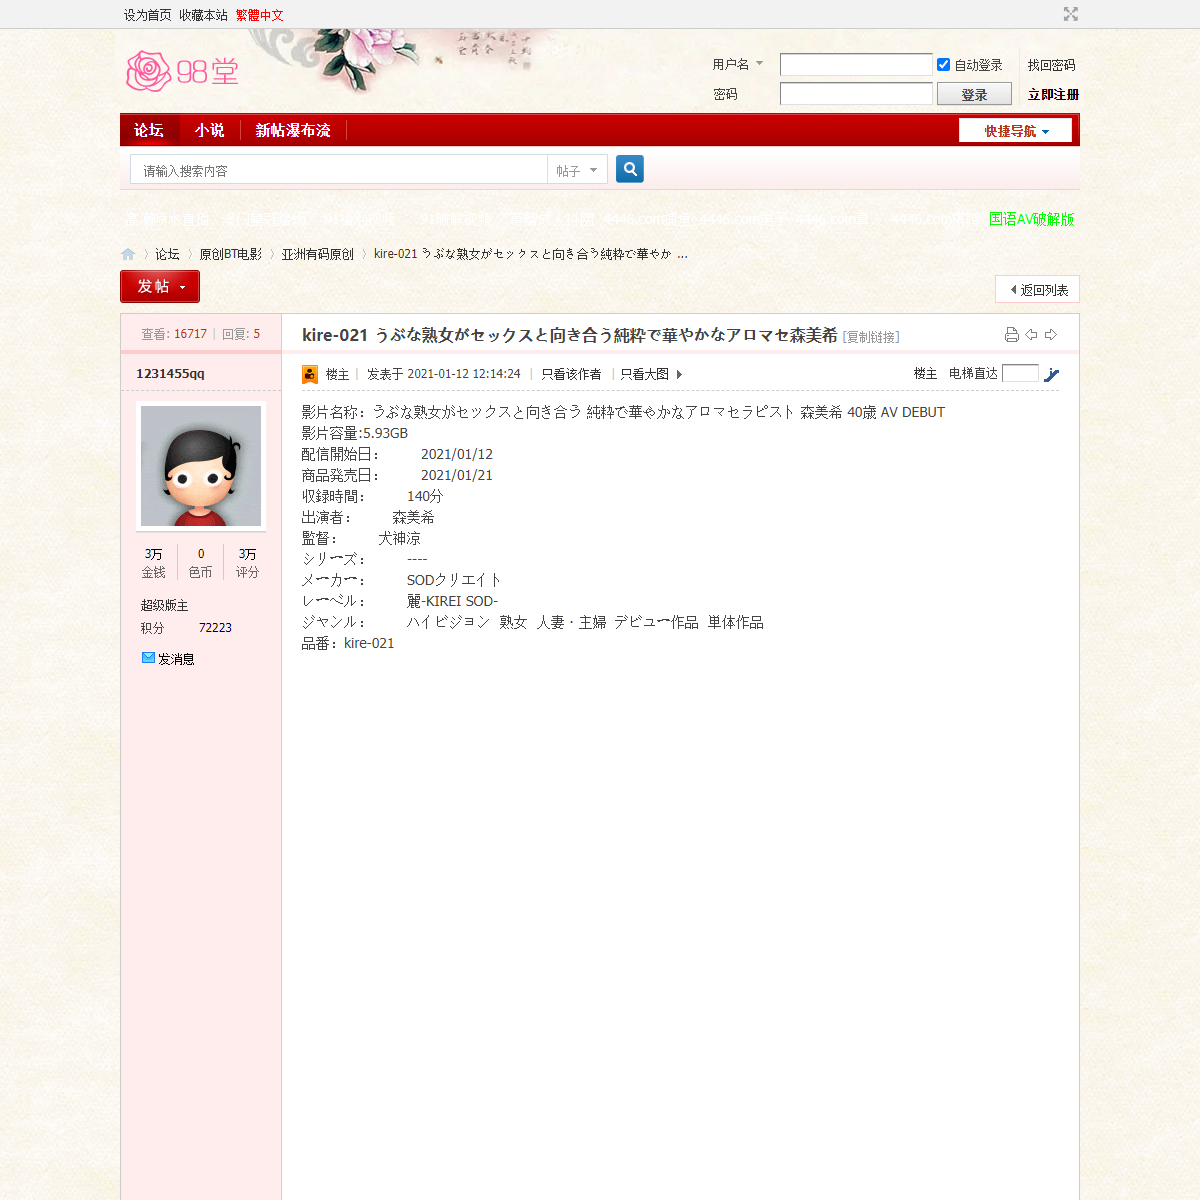 A complete backup of https://sehuatang.net/thread-441846-1-1.html